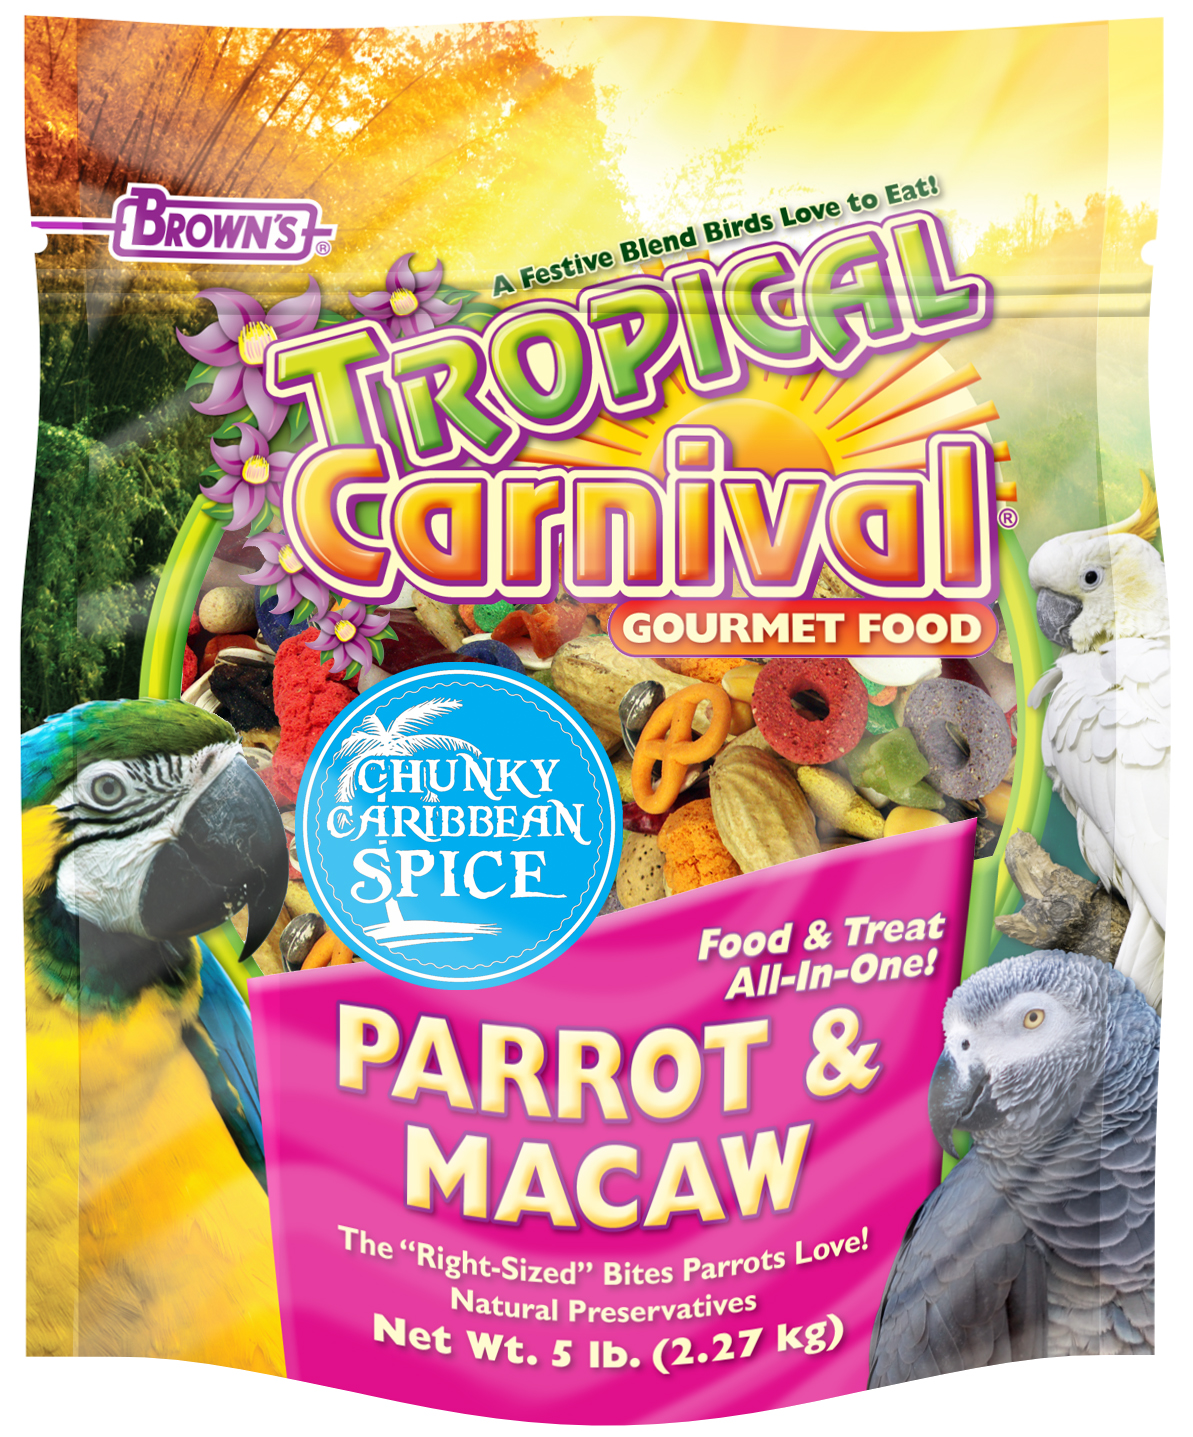 tropical carnival parrot food